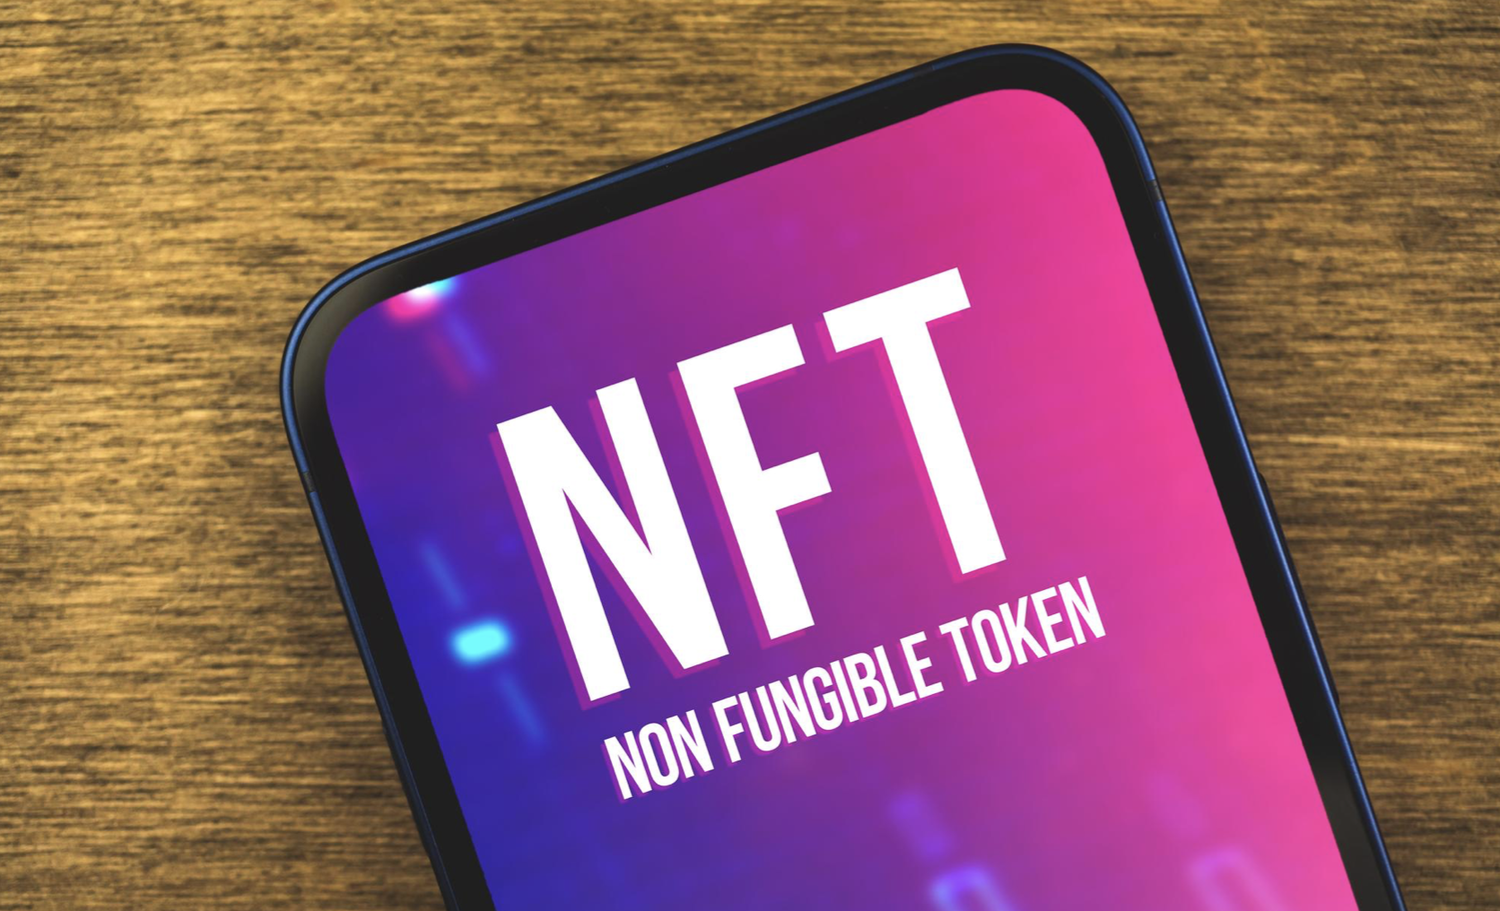 NFT: What is it, and How are Non-Fungible Tokens (NFTs) Transforming the Idea of Digital Art